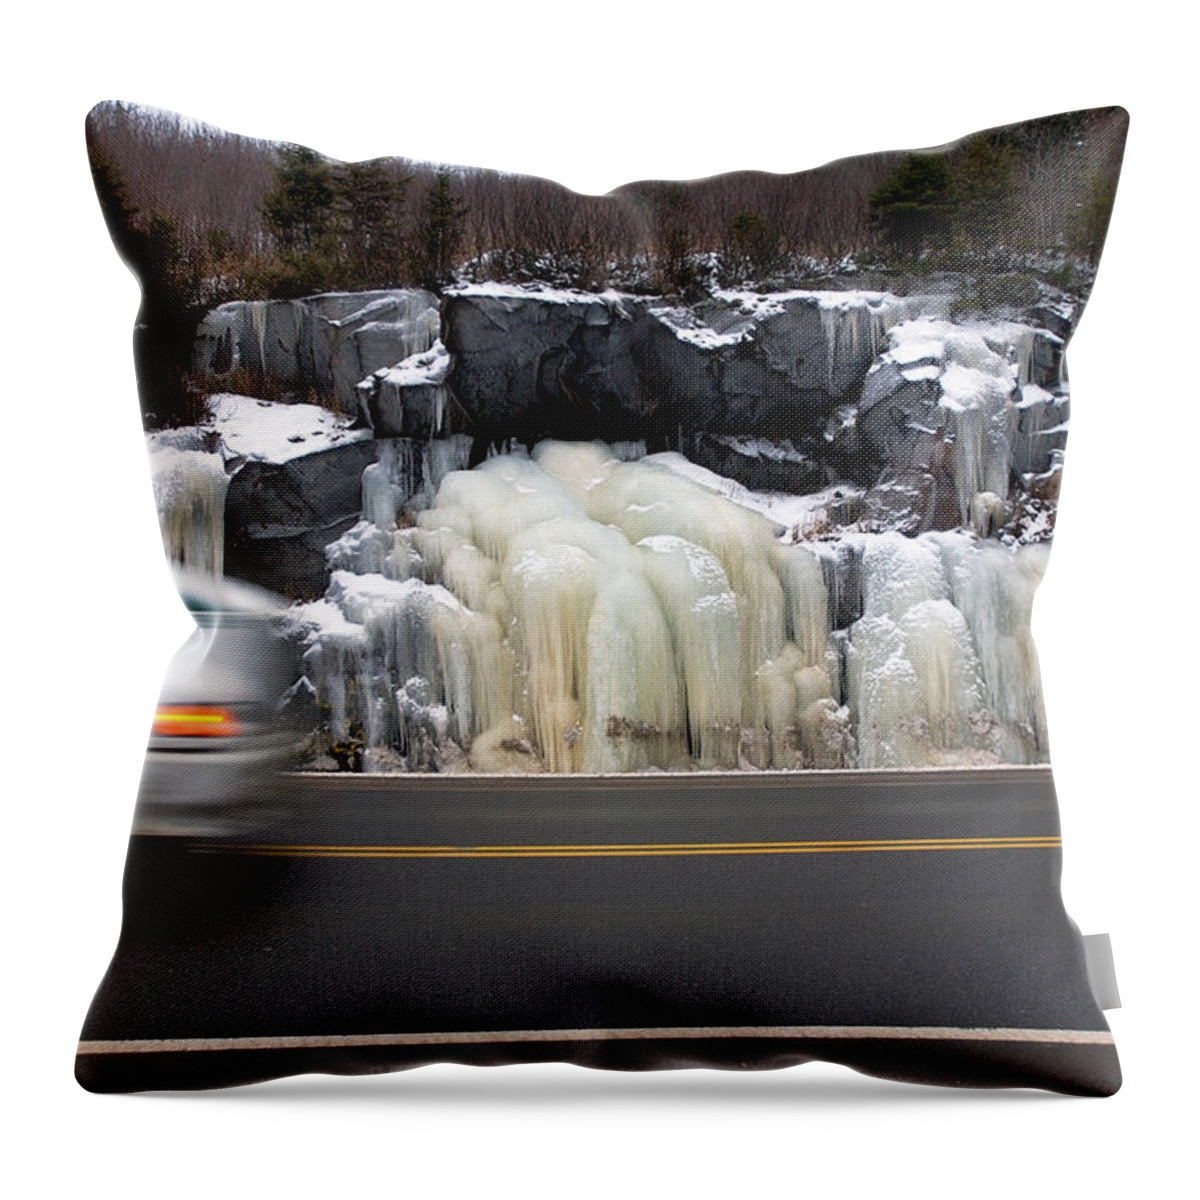 Hwy Throw Pillow featuring the photograph HWY Ice  by Doug Gibbons